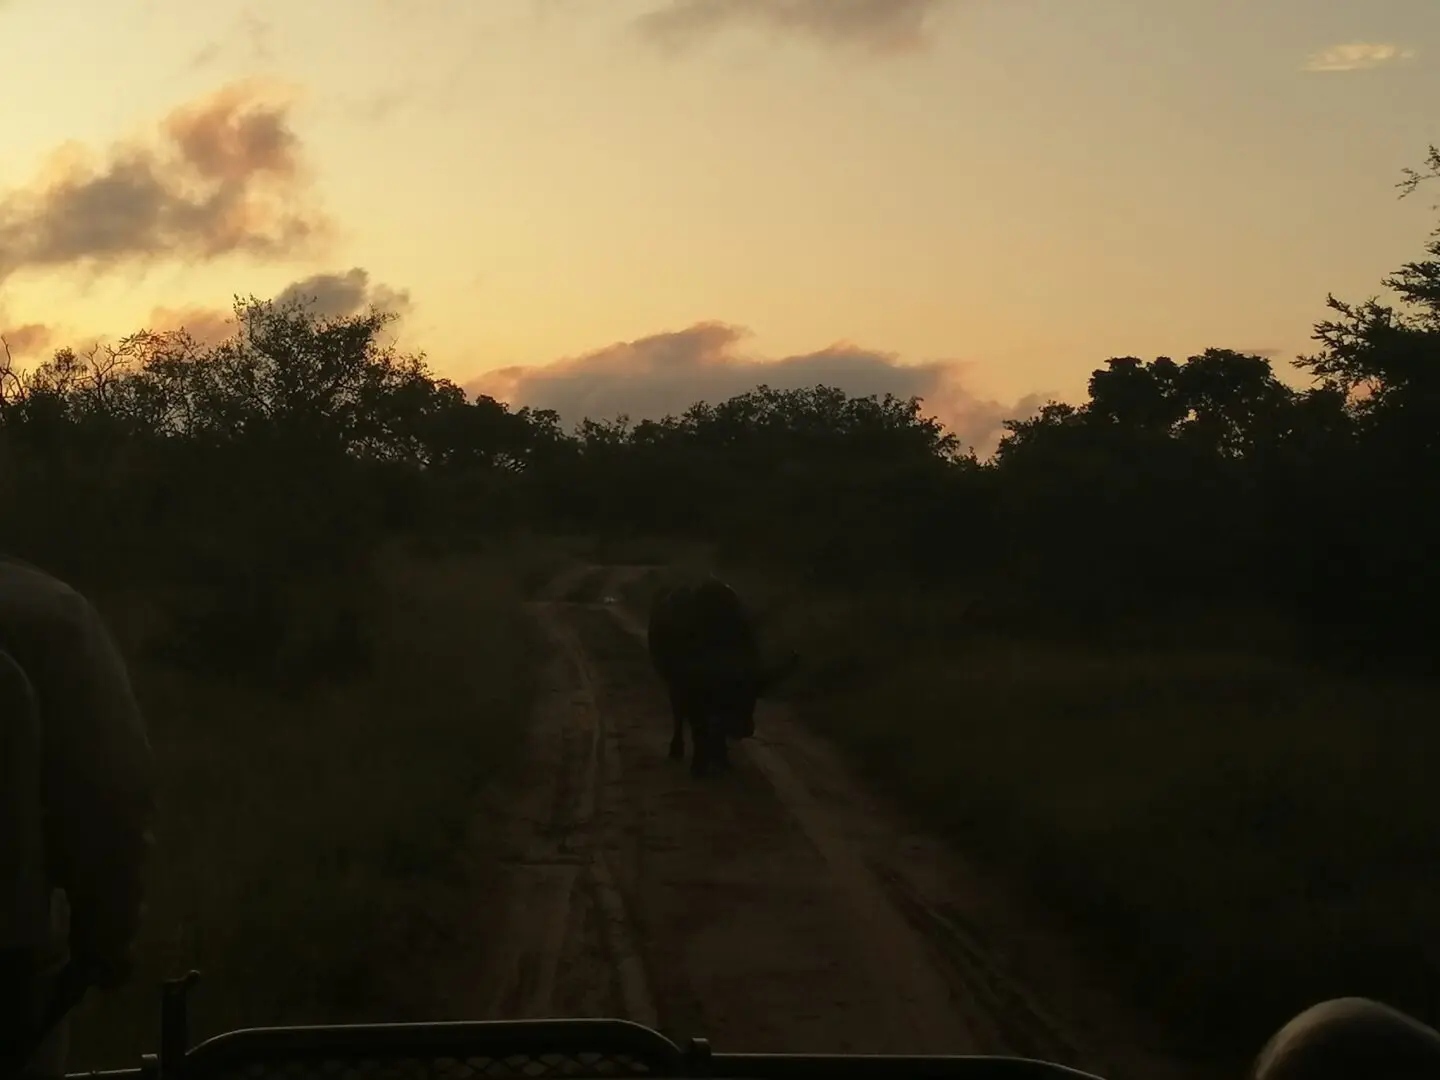 A herd of elephants walking down the road at sunset.